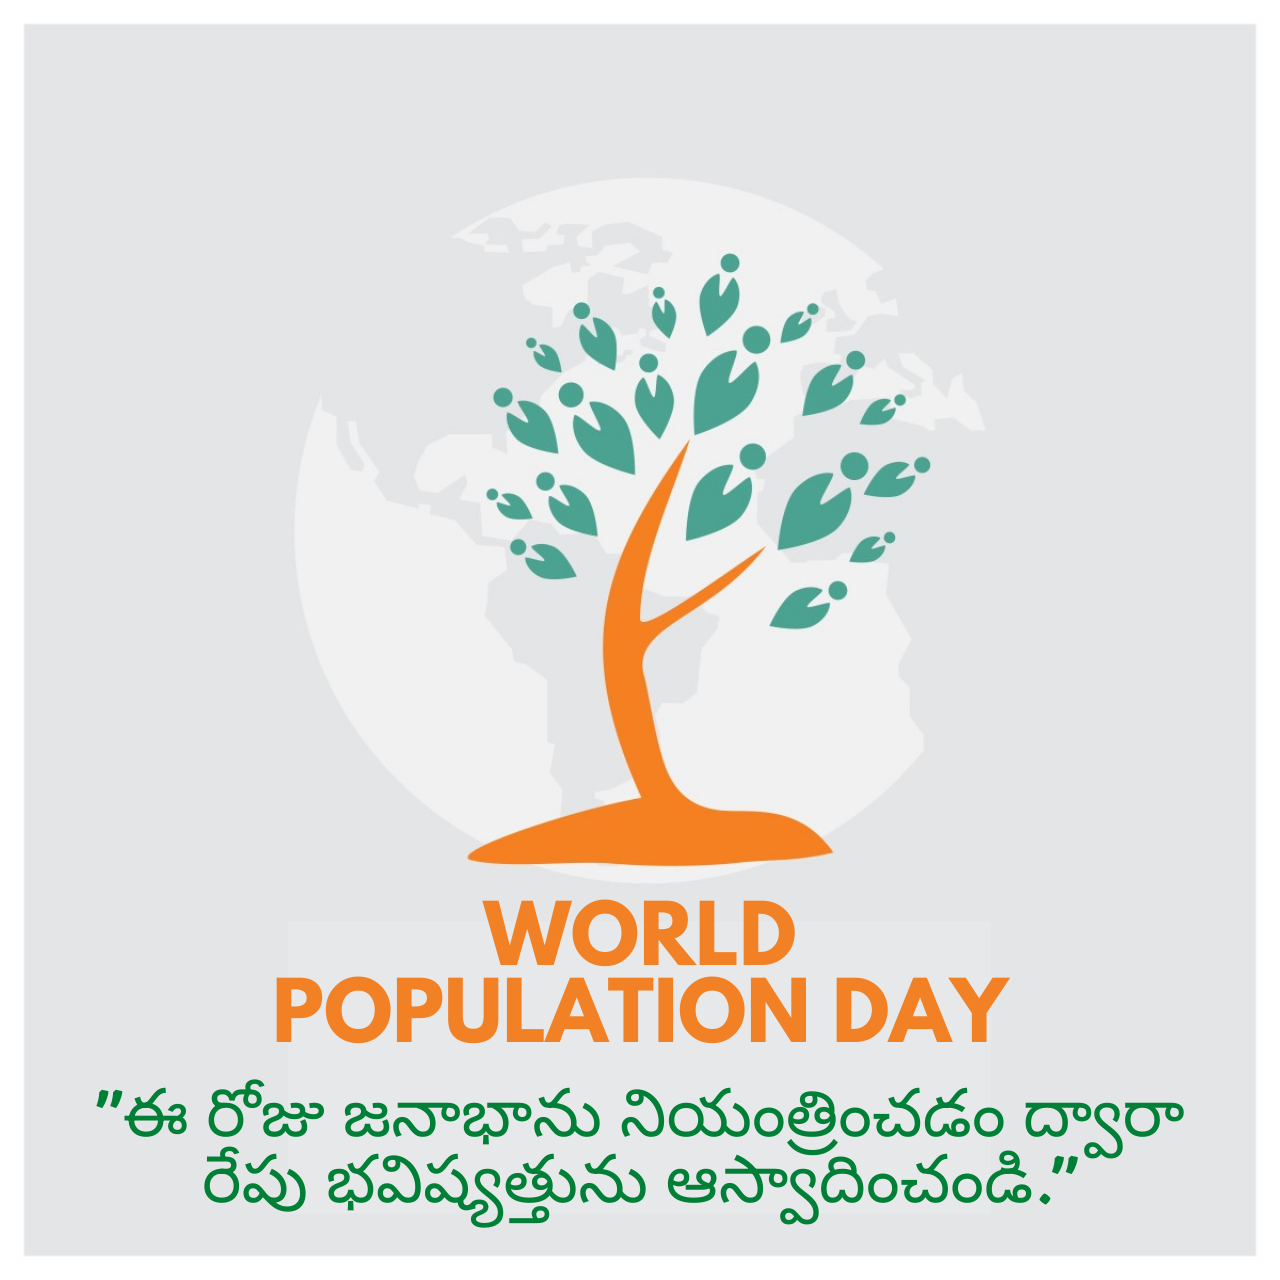 World Population Day 2022: Current Theme, Quotes, Slogans, Posters, Drawings, Instagram Captions, Messages, and WhatsApp Status Video to Share